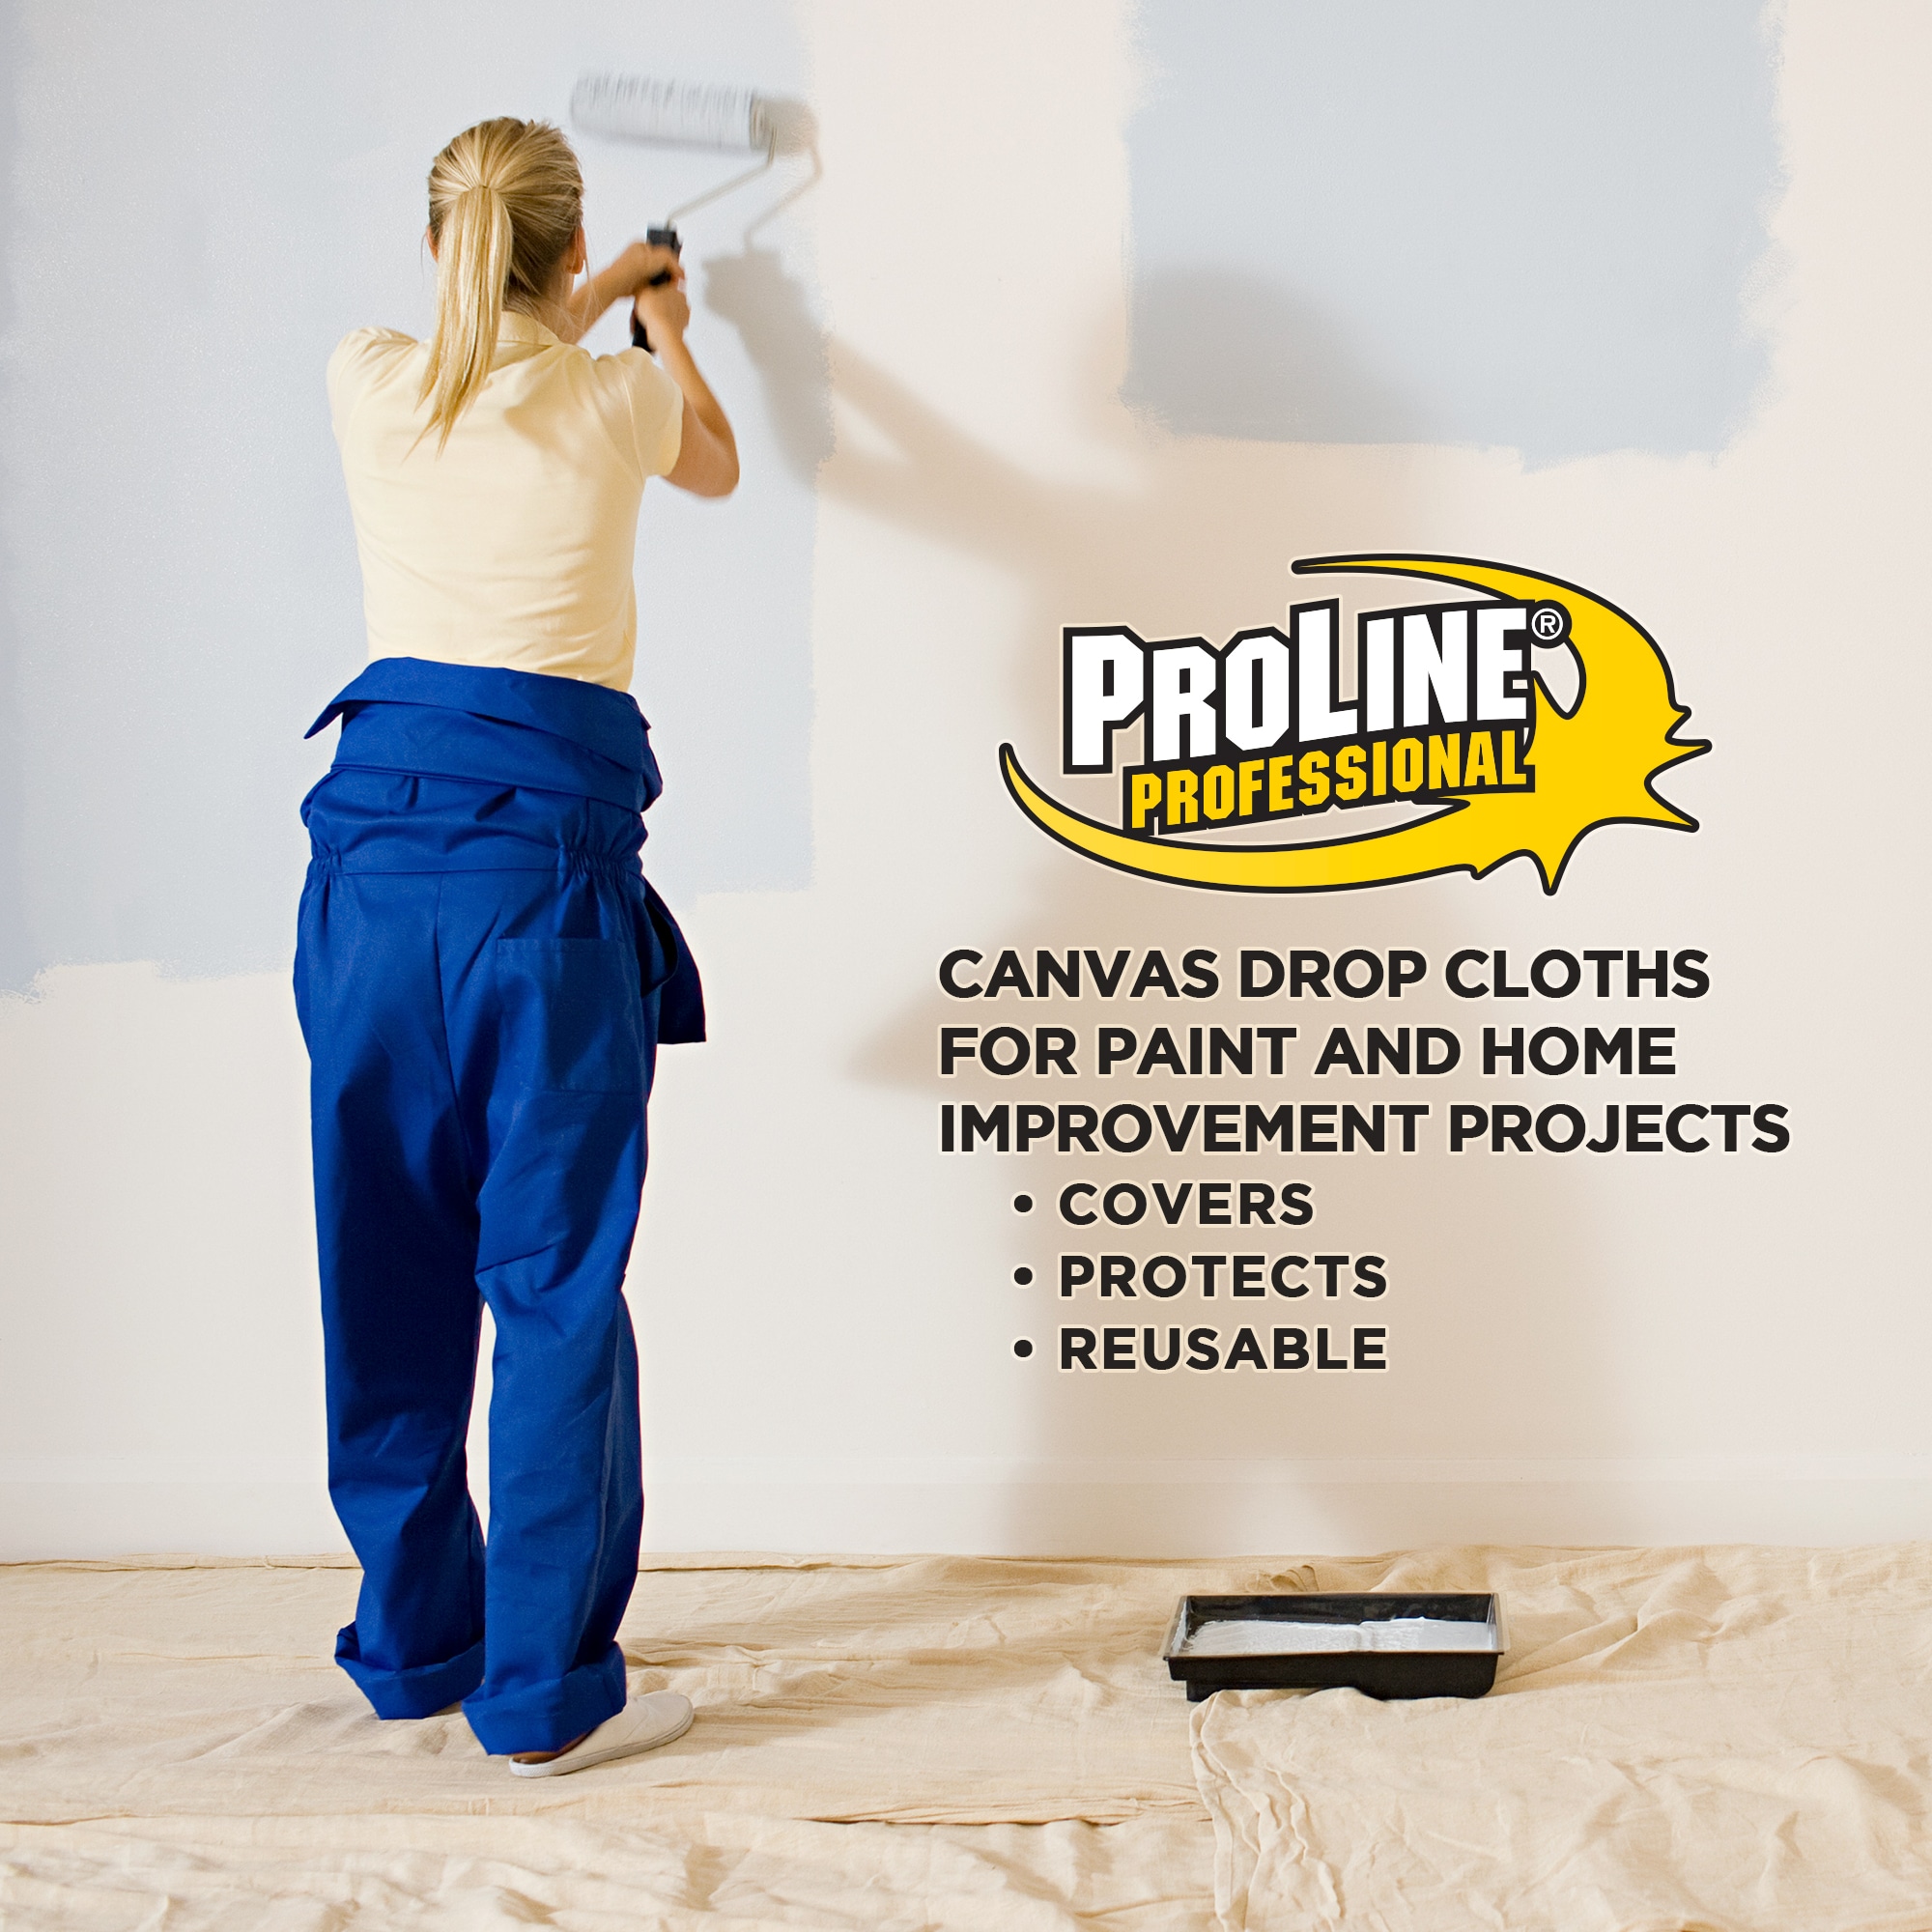 Home Improvement Painting Supplies Can Ladder Brush Drop Cloth Stock Photo  - Download Image Now - iStock